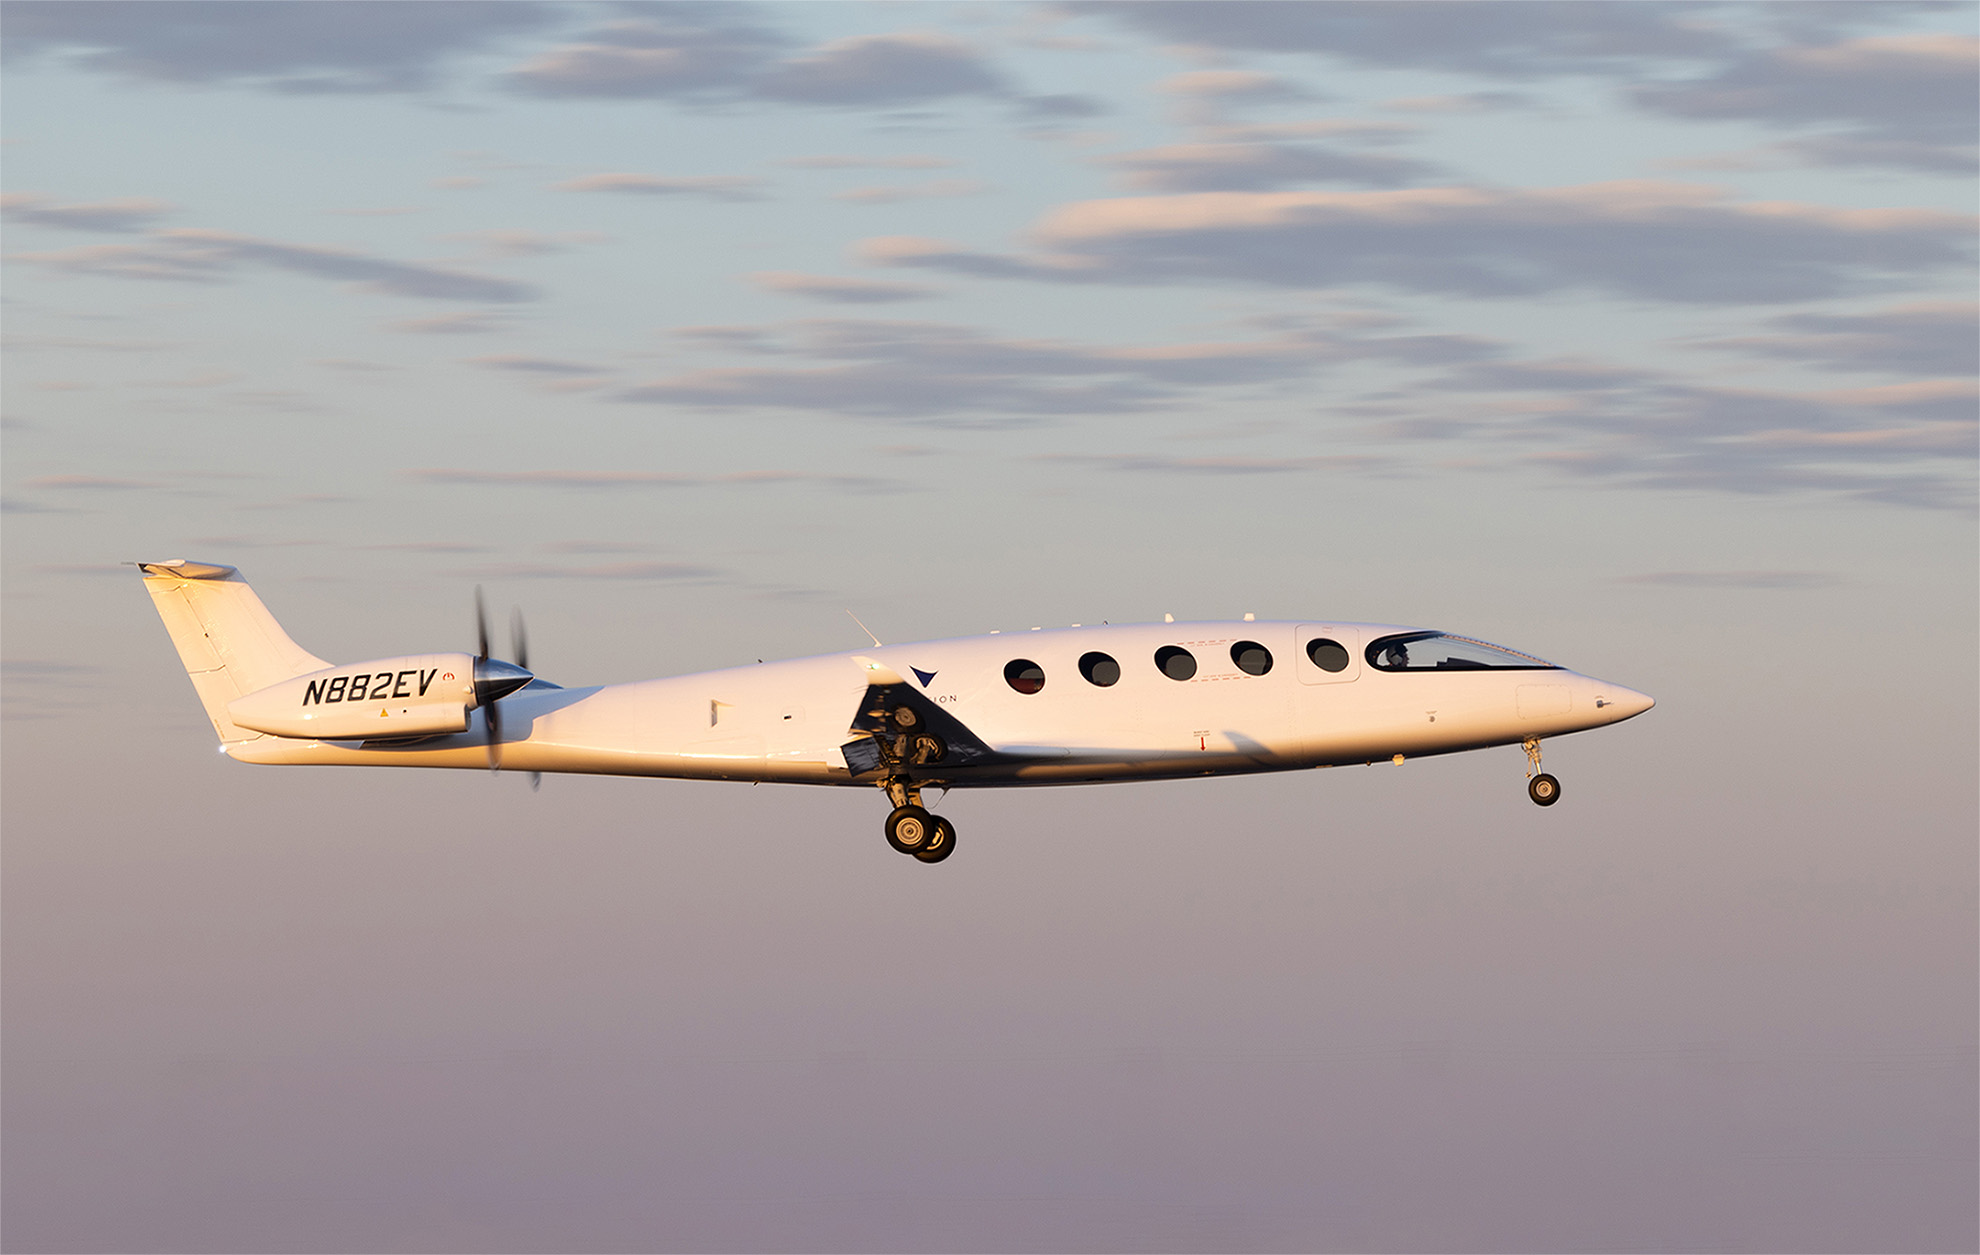 alice the all-electric regional jet prototype from Eviation